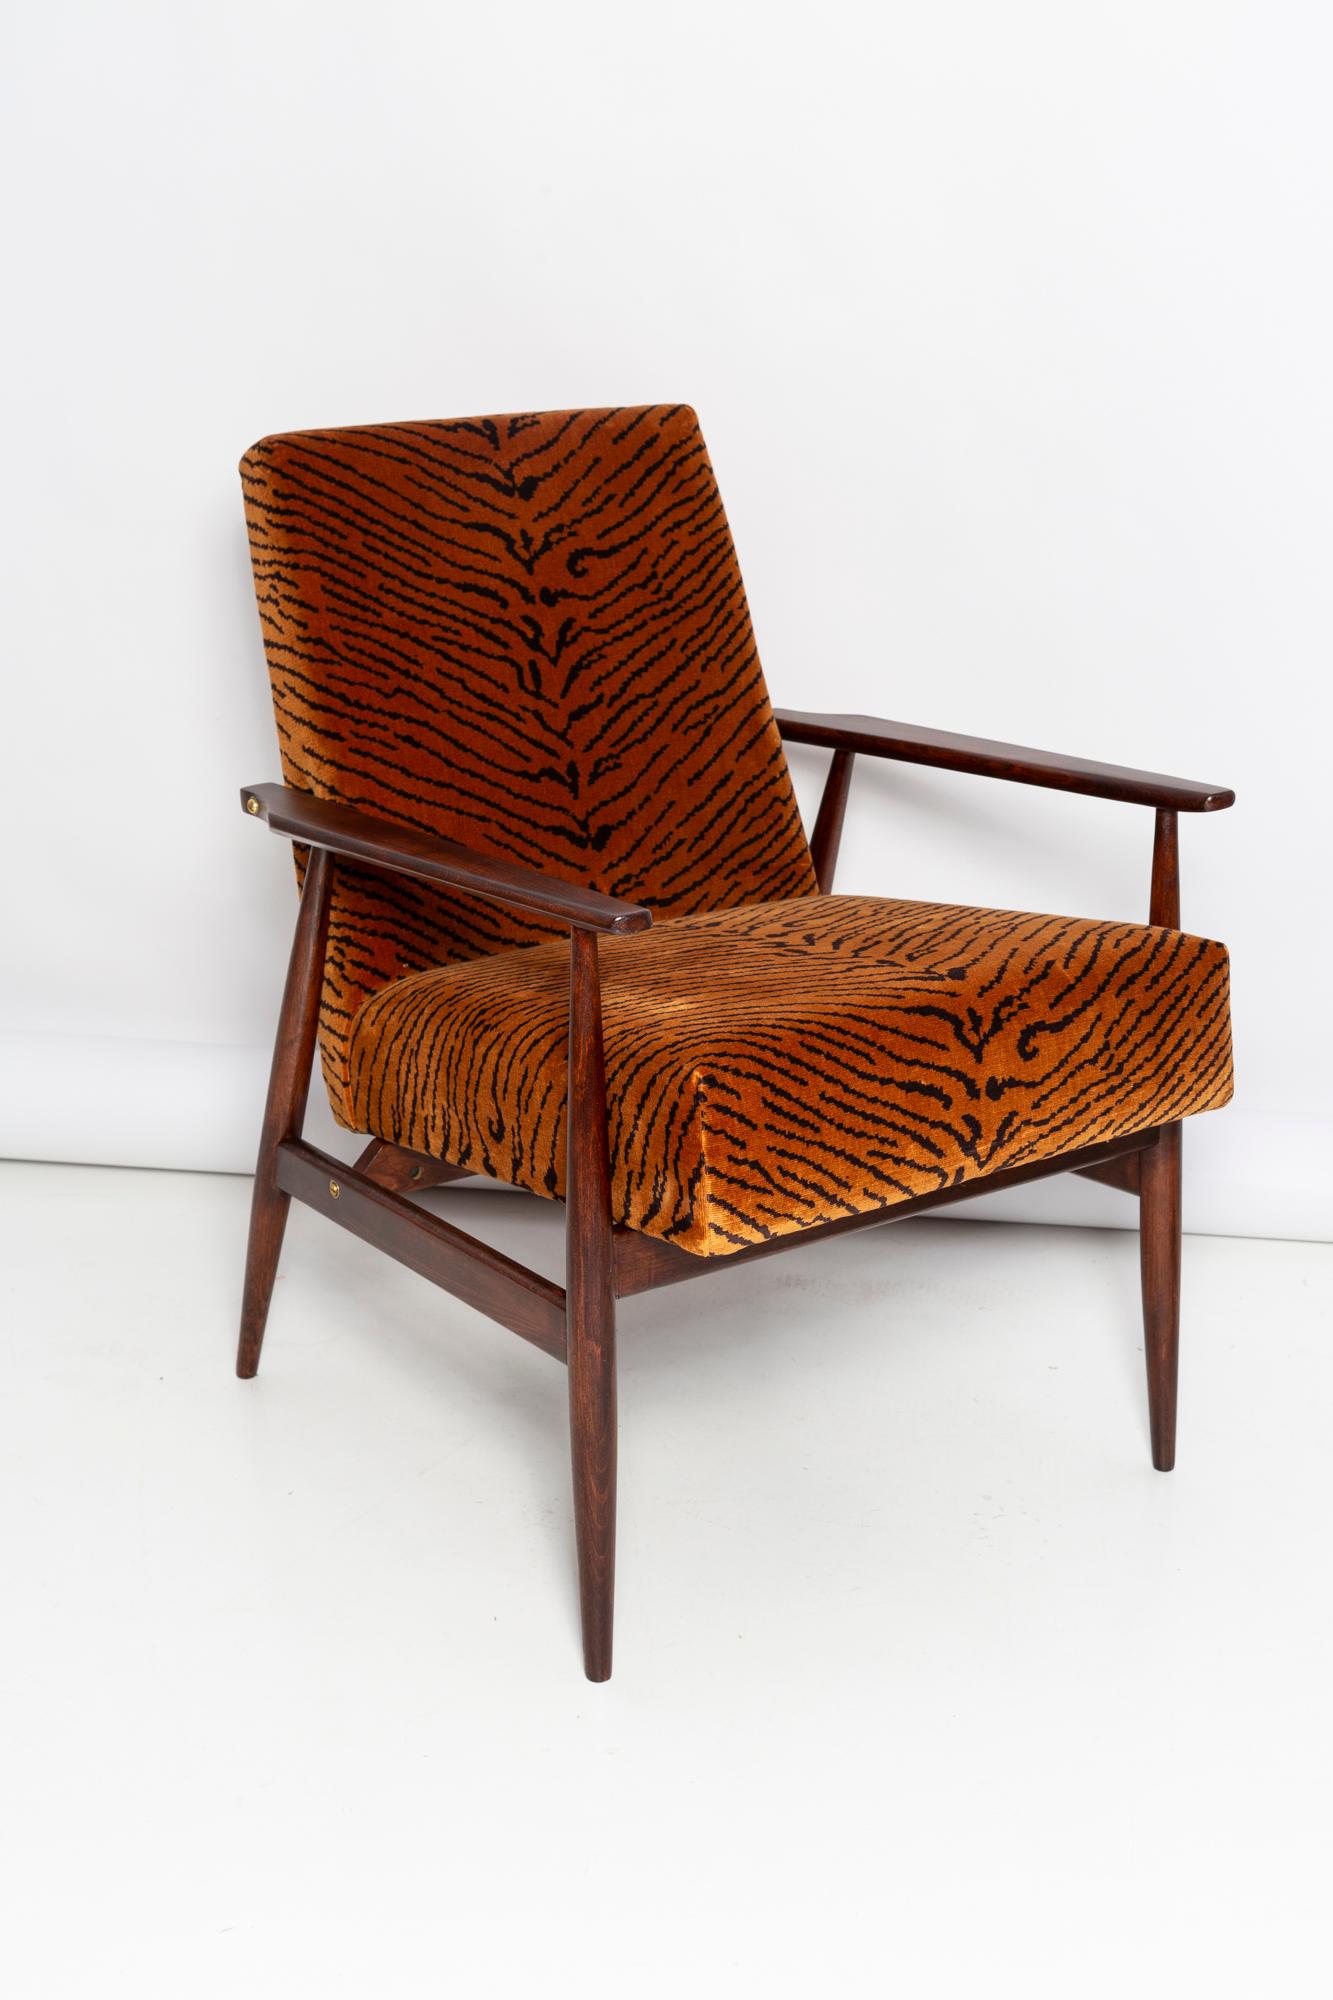 A beautiful, restored armchair designed by Henryk Lis. Furniture after full carpentry and upholstery renovation. The fabric, which is covered with a backrest and a seat, is a high-quality Italian Dedar velvet upholstery printed in tiger pattern. The